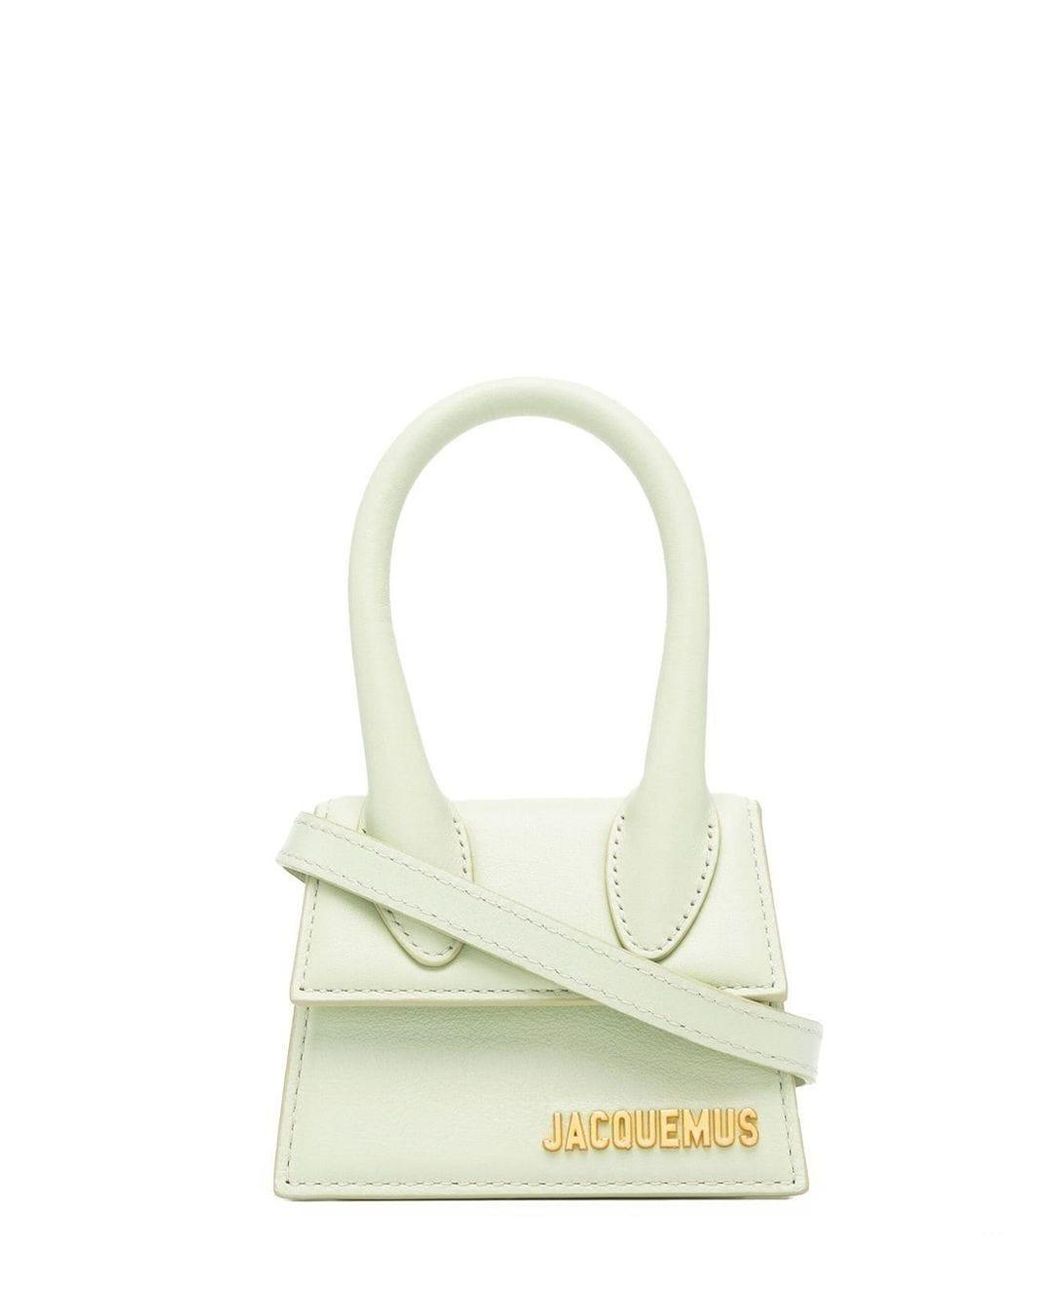 Jacquemus Le Chiquito Mini Green Bag in White | Lyst